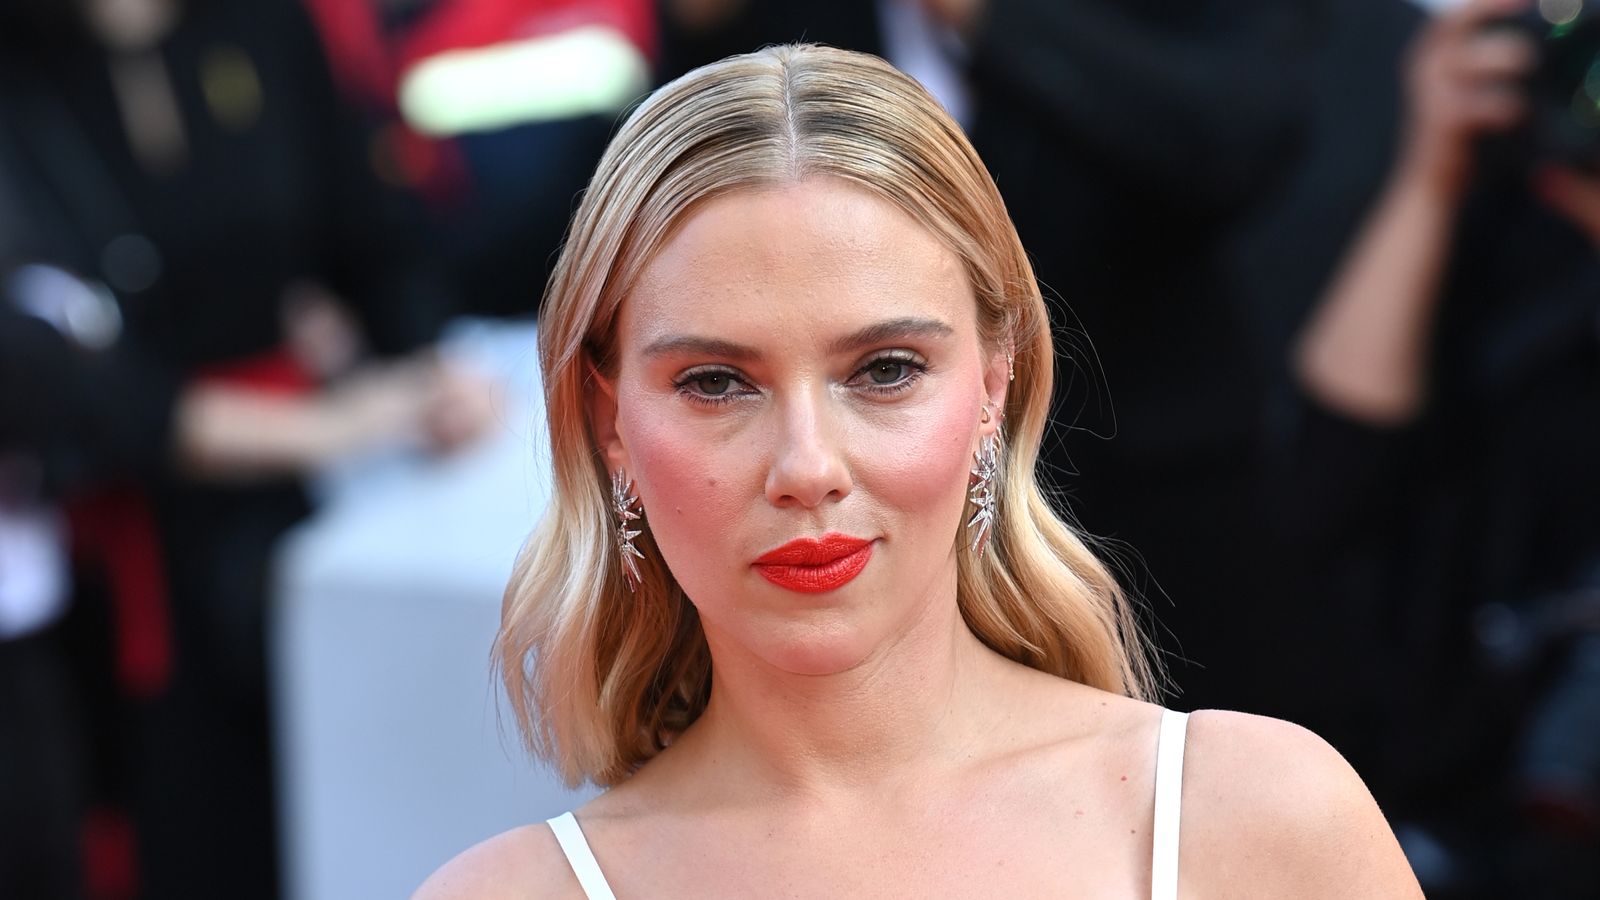 Scarlett Johansson 'shocked and angered' after OpenAI allegedly recreated her voice without consent